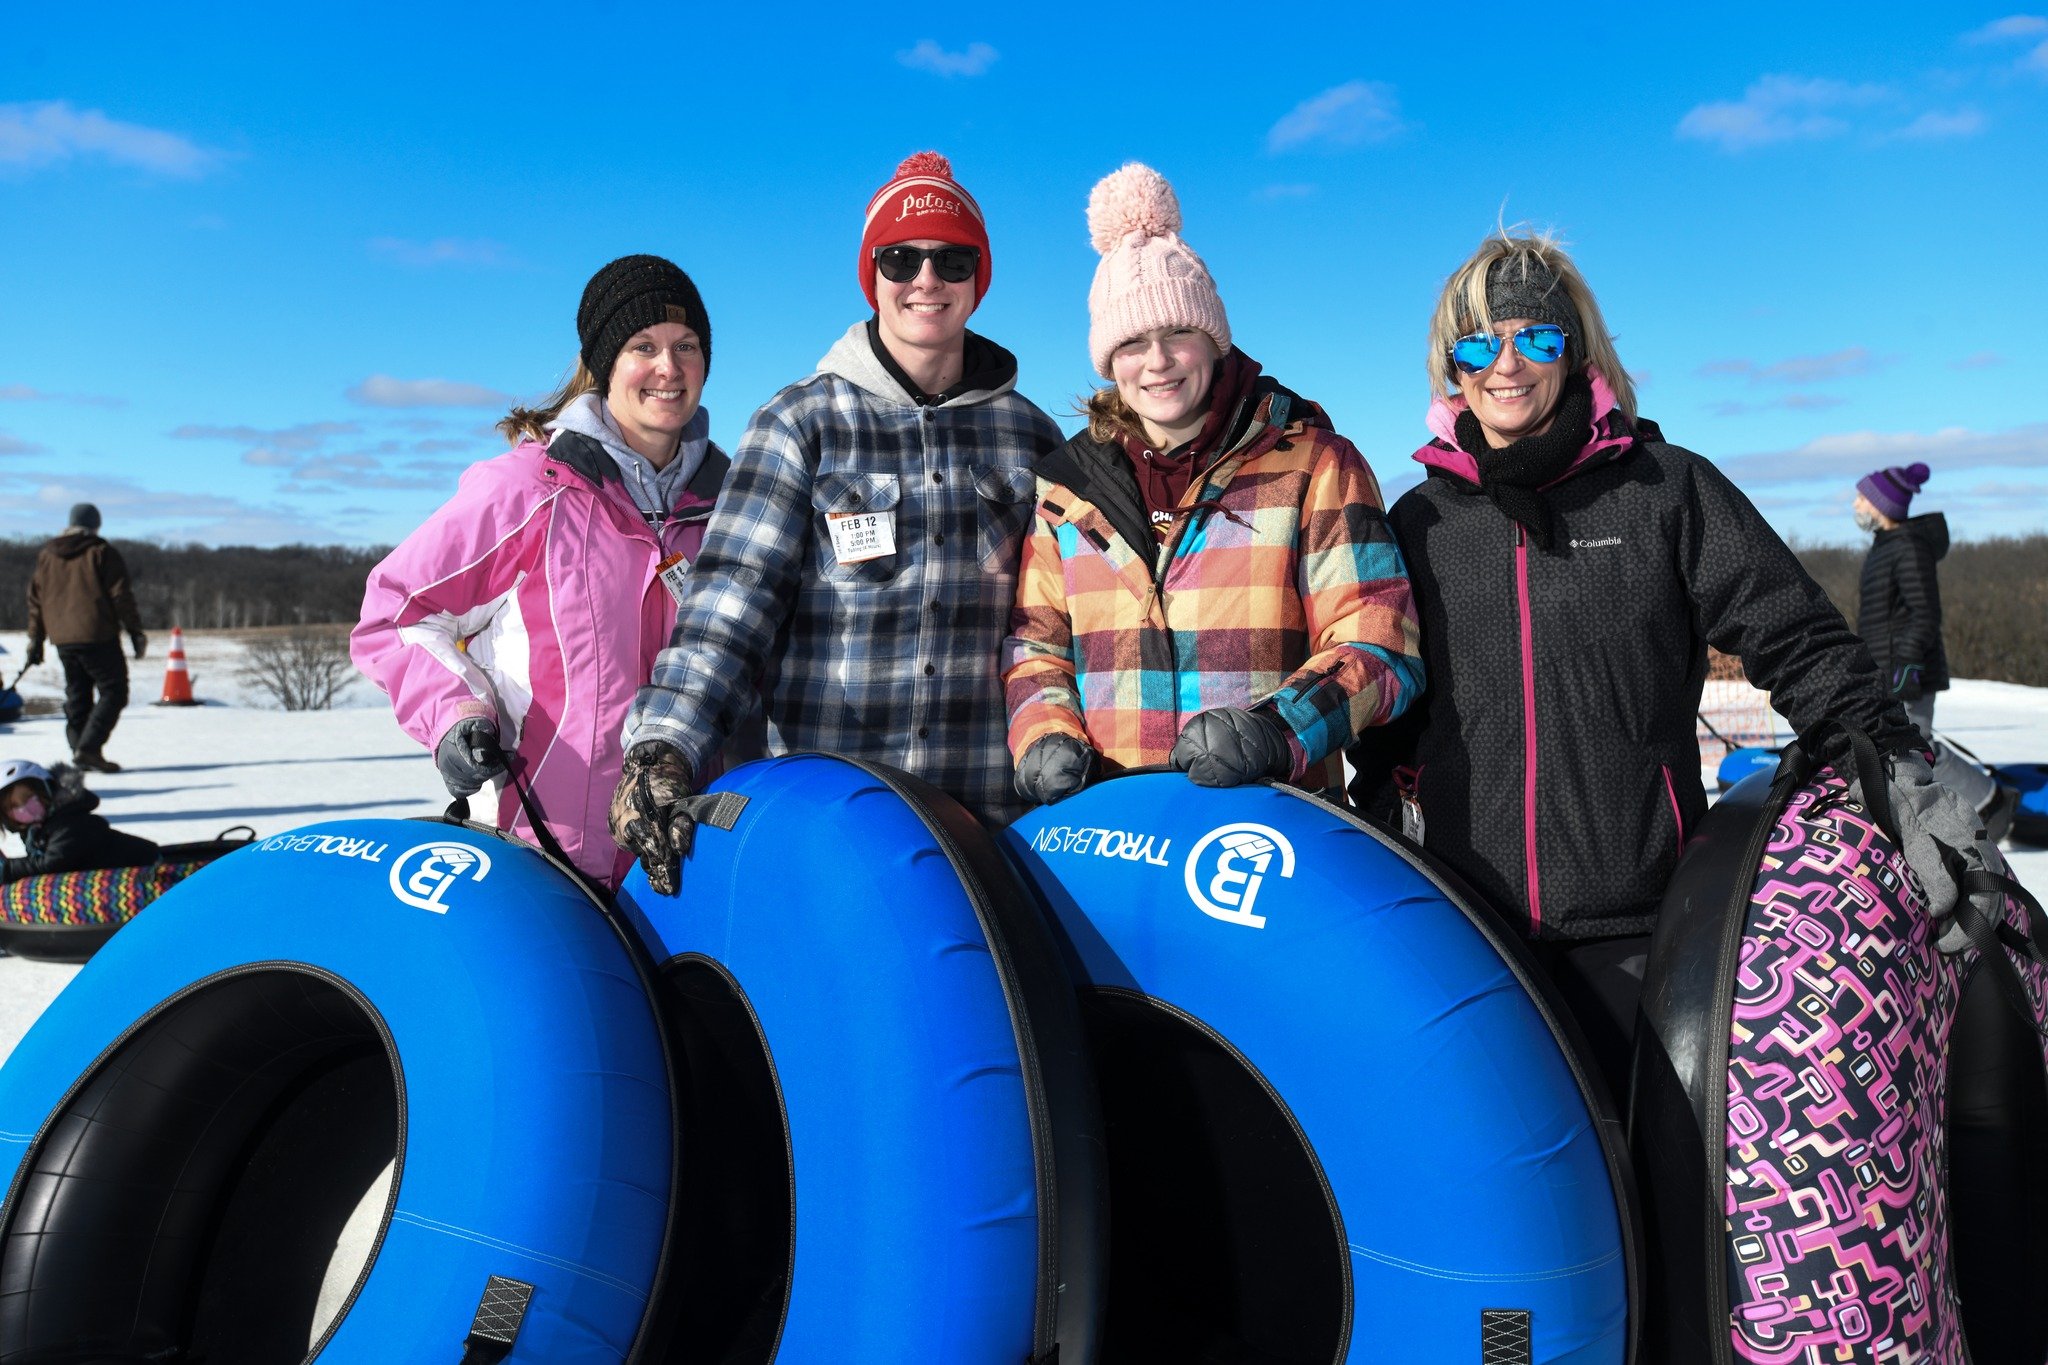  Tubing at Tyrol Basin. Photo courtesy of the Mt. Horeb Chamber of Commerce. 